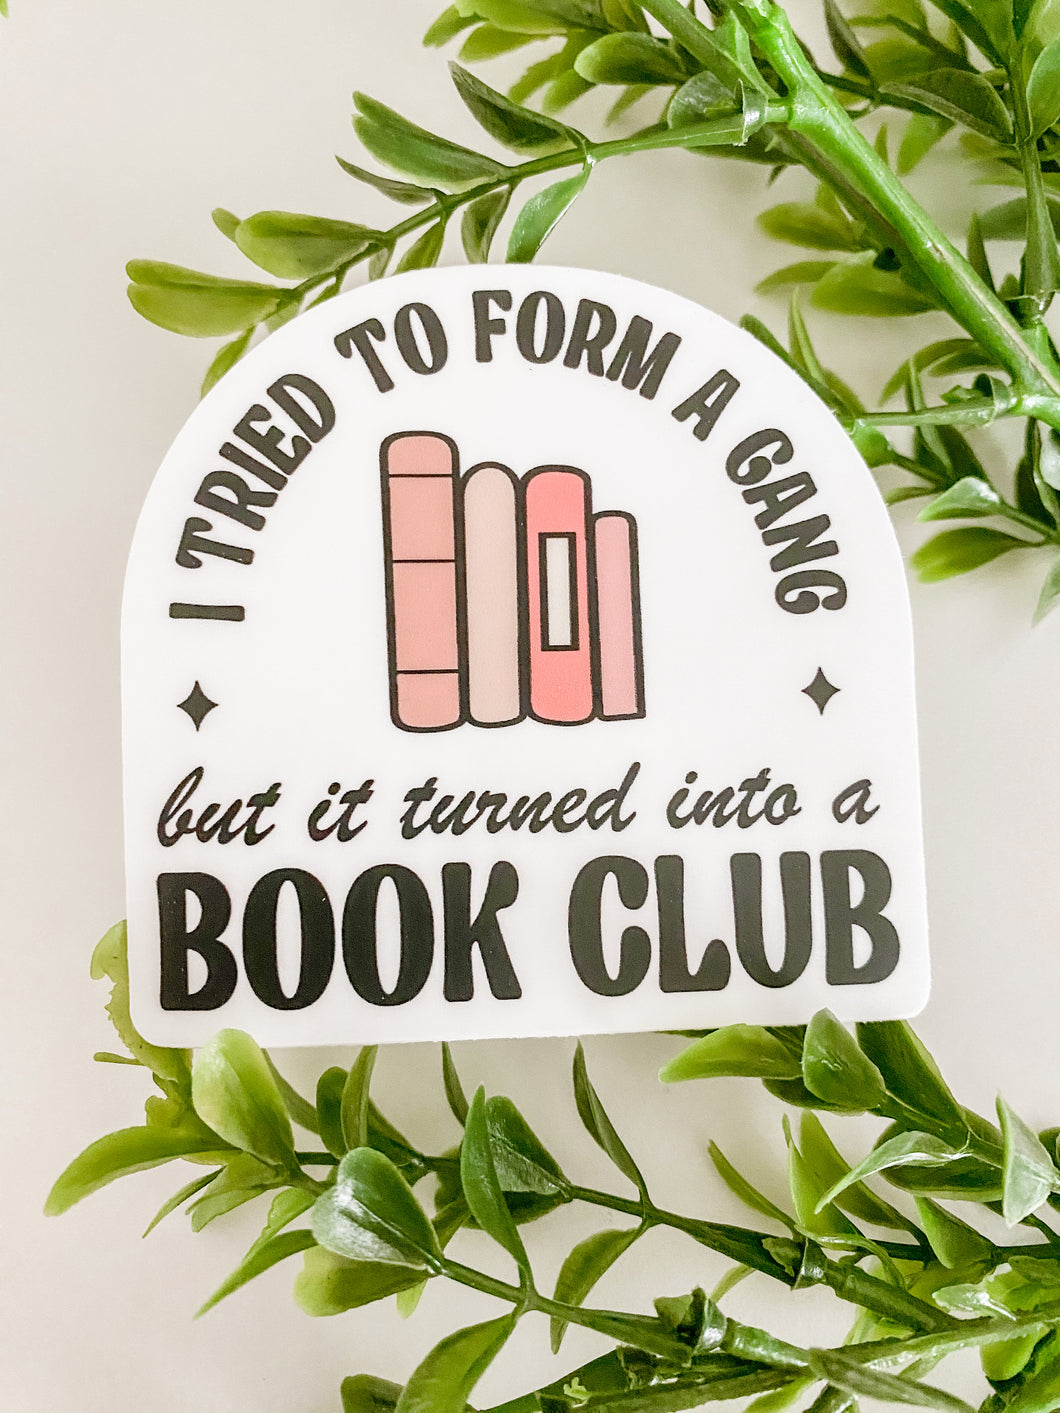 I tried to form a gang but it turned into a book club kindle sticker